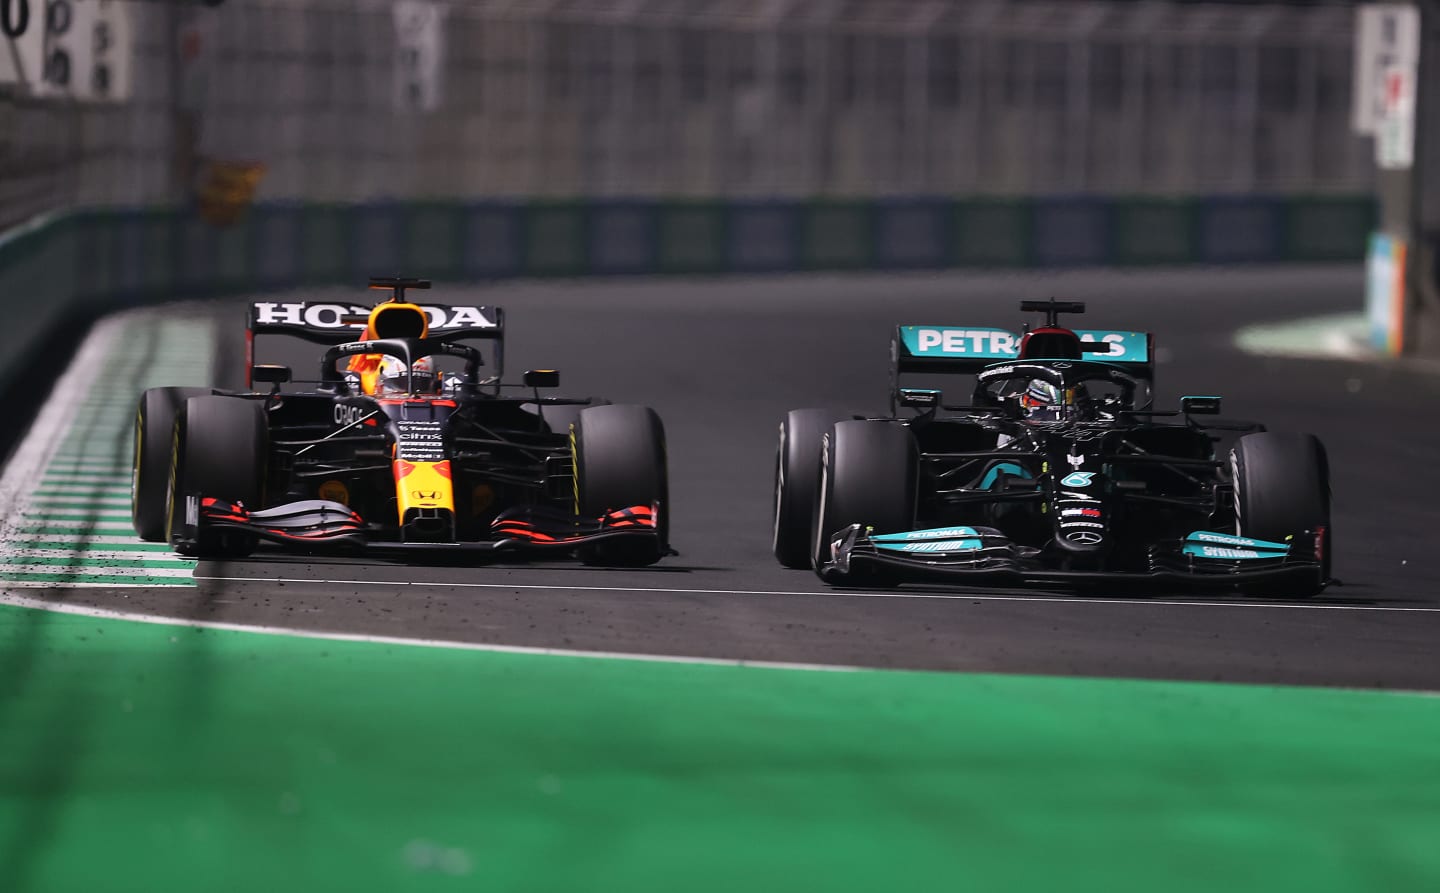 JEDDAH, SAUDI ARABIA - DECEMBER 05: Max Verstappen of the Netherlands driving the (33) Red Bull Racing RB16B Honda and Lewis Hamilton of Great Britain driving the (44) Mercedes AMG Petronas F1 Team Mercedes W12 during the F1 Grand Prix of Saudi Arabia at Jeddah Corniche Circuit on December 05, 2021 in Jeddah, Saudi Arabia. (Photo by Lars Baron/Getty Images)